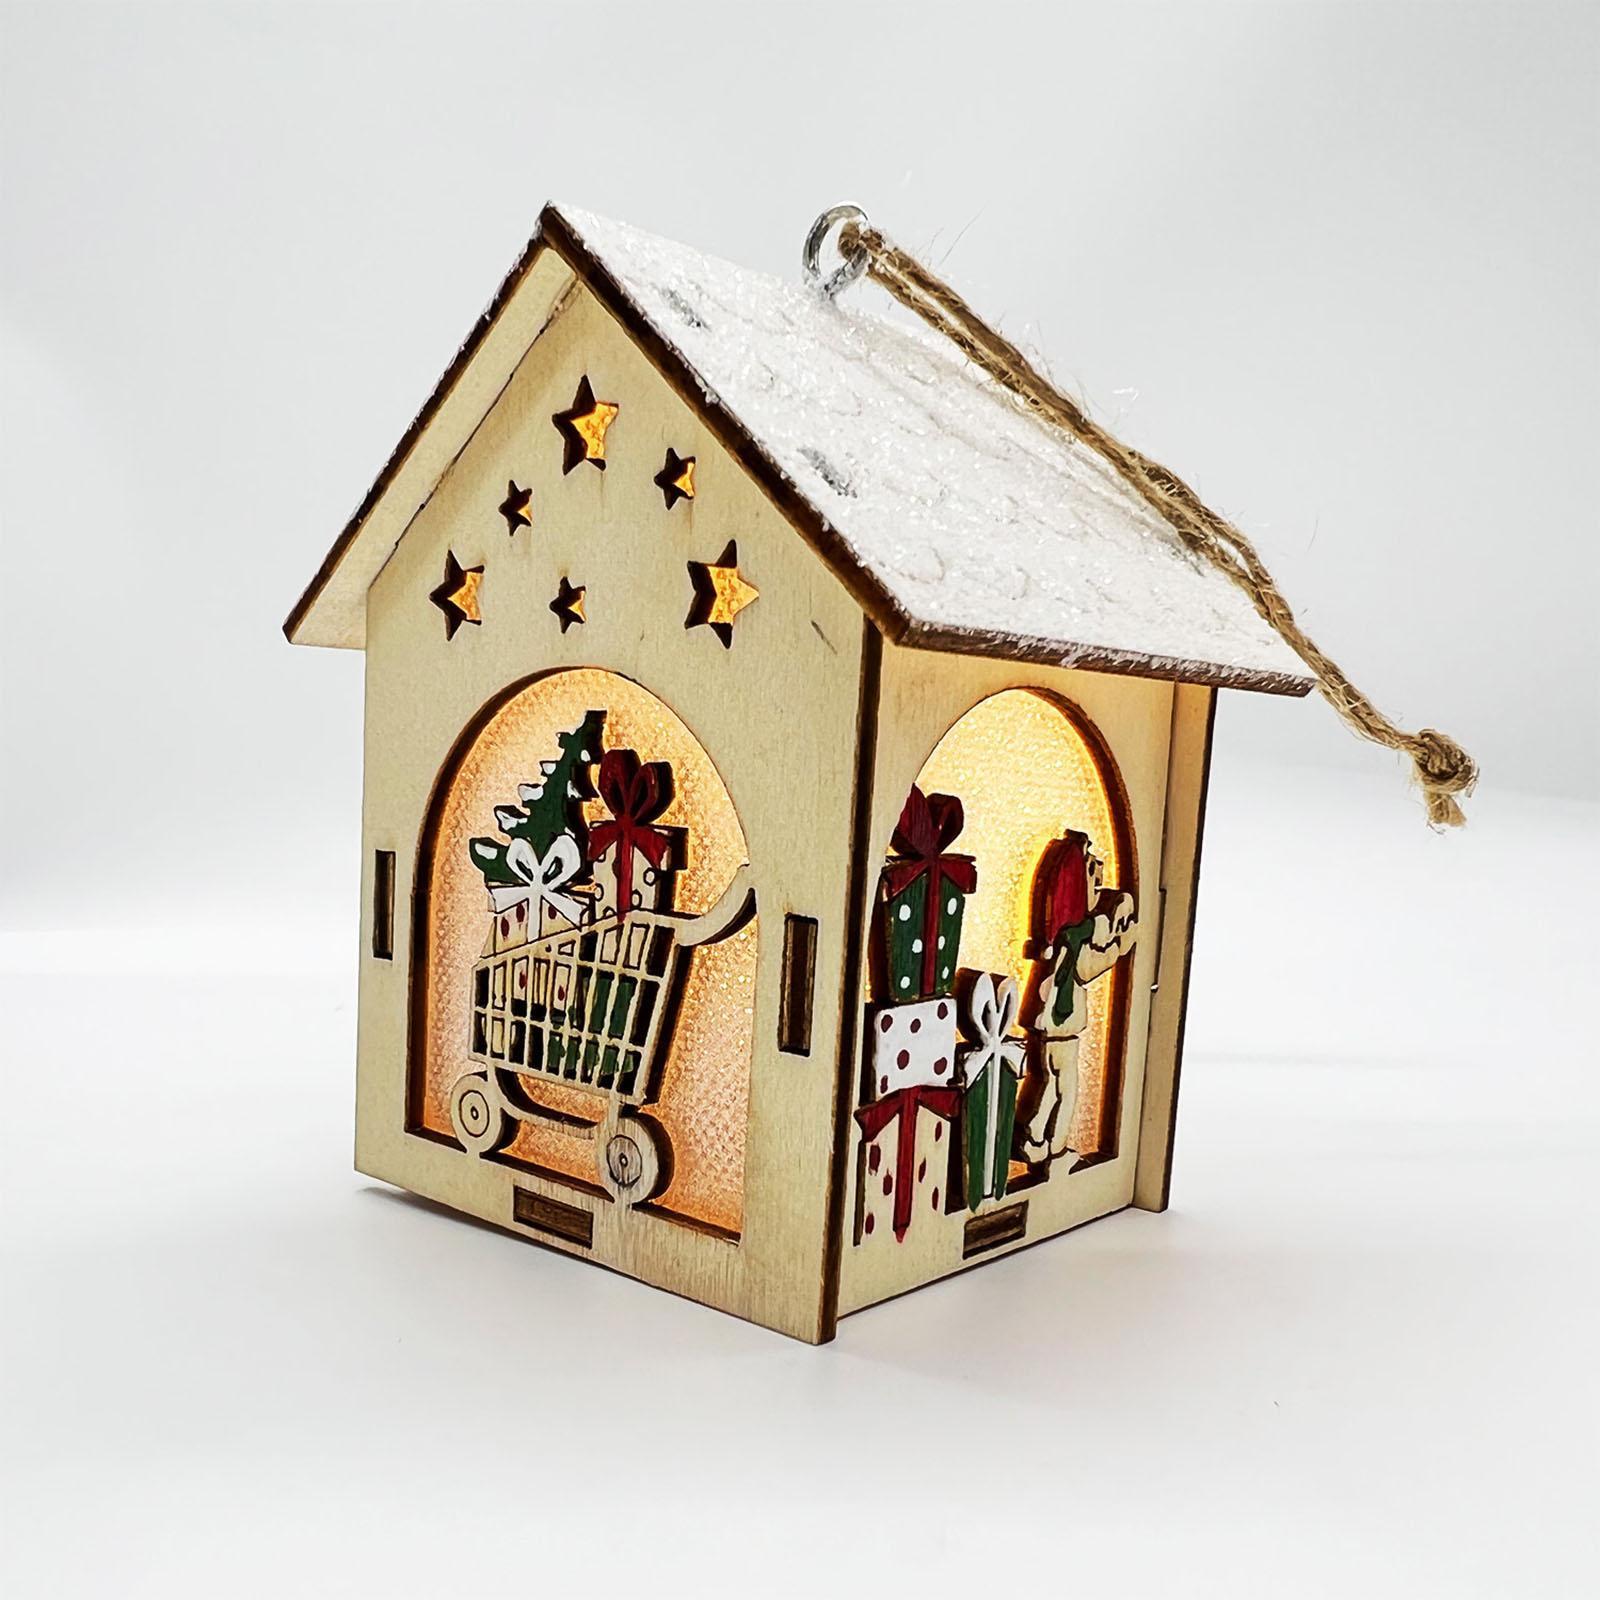 Mini Wooden House Building Set Lights up for Christmas Tabletop Decoration